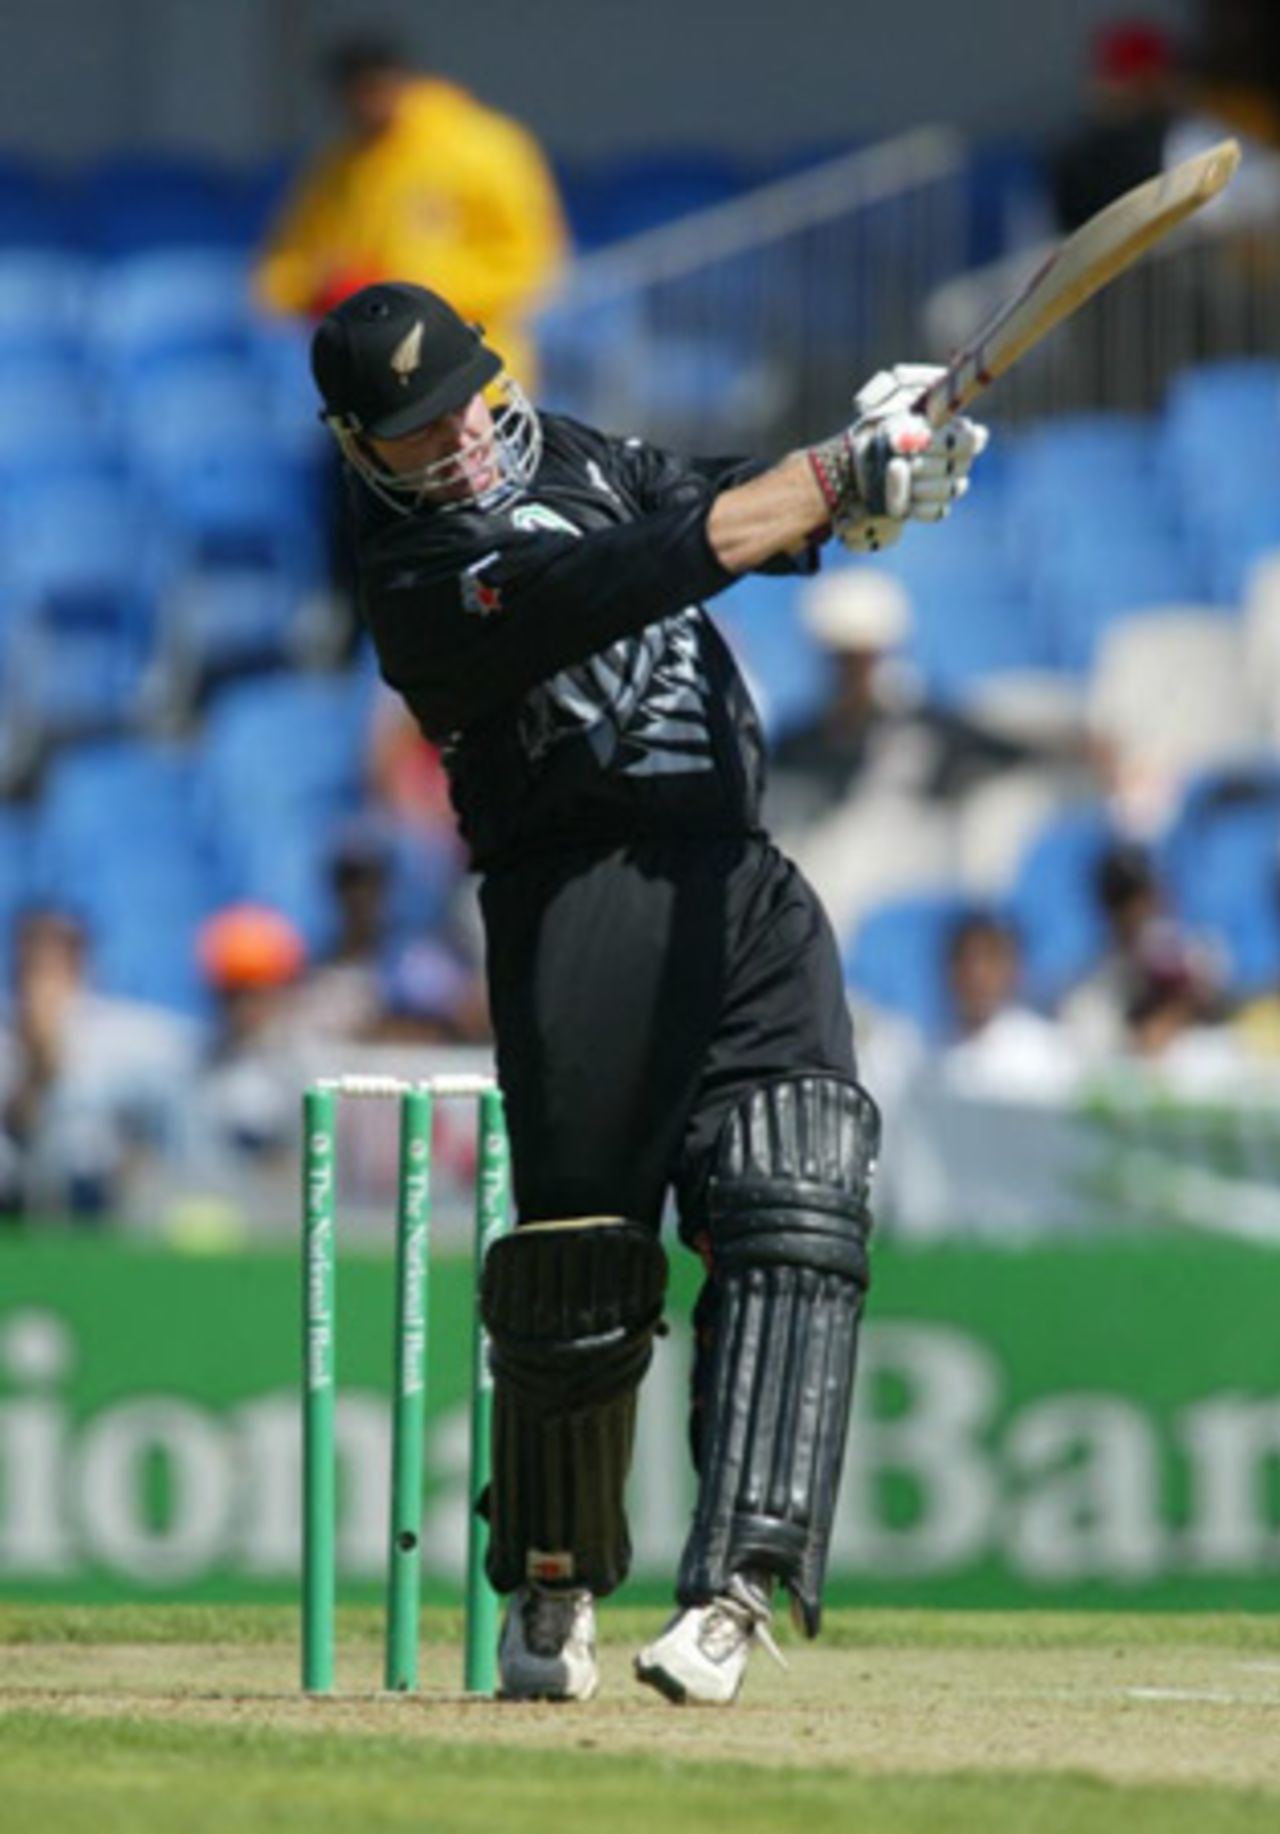 New Zealand batsman Scott Styris pulls a delivery to the midwicket boundary during his innings of 42. 6th ODI: New Zealand v India at Eden Park, Auckland, 11 January 2003.